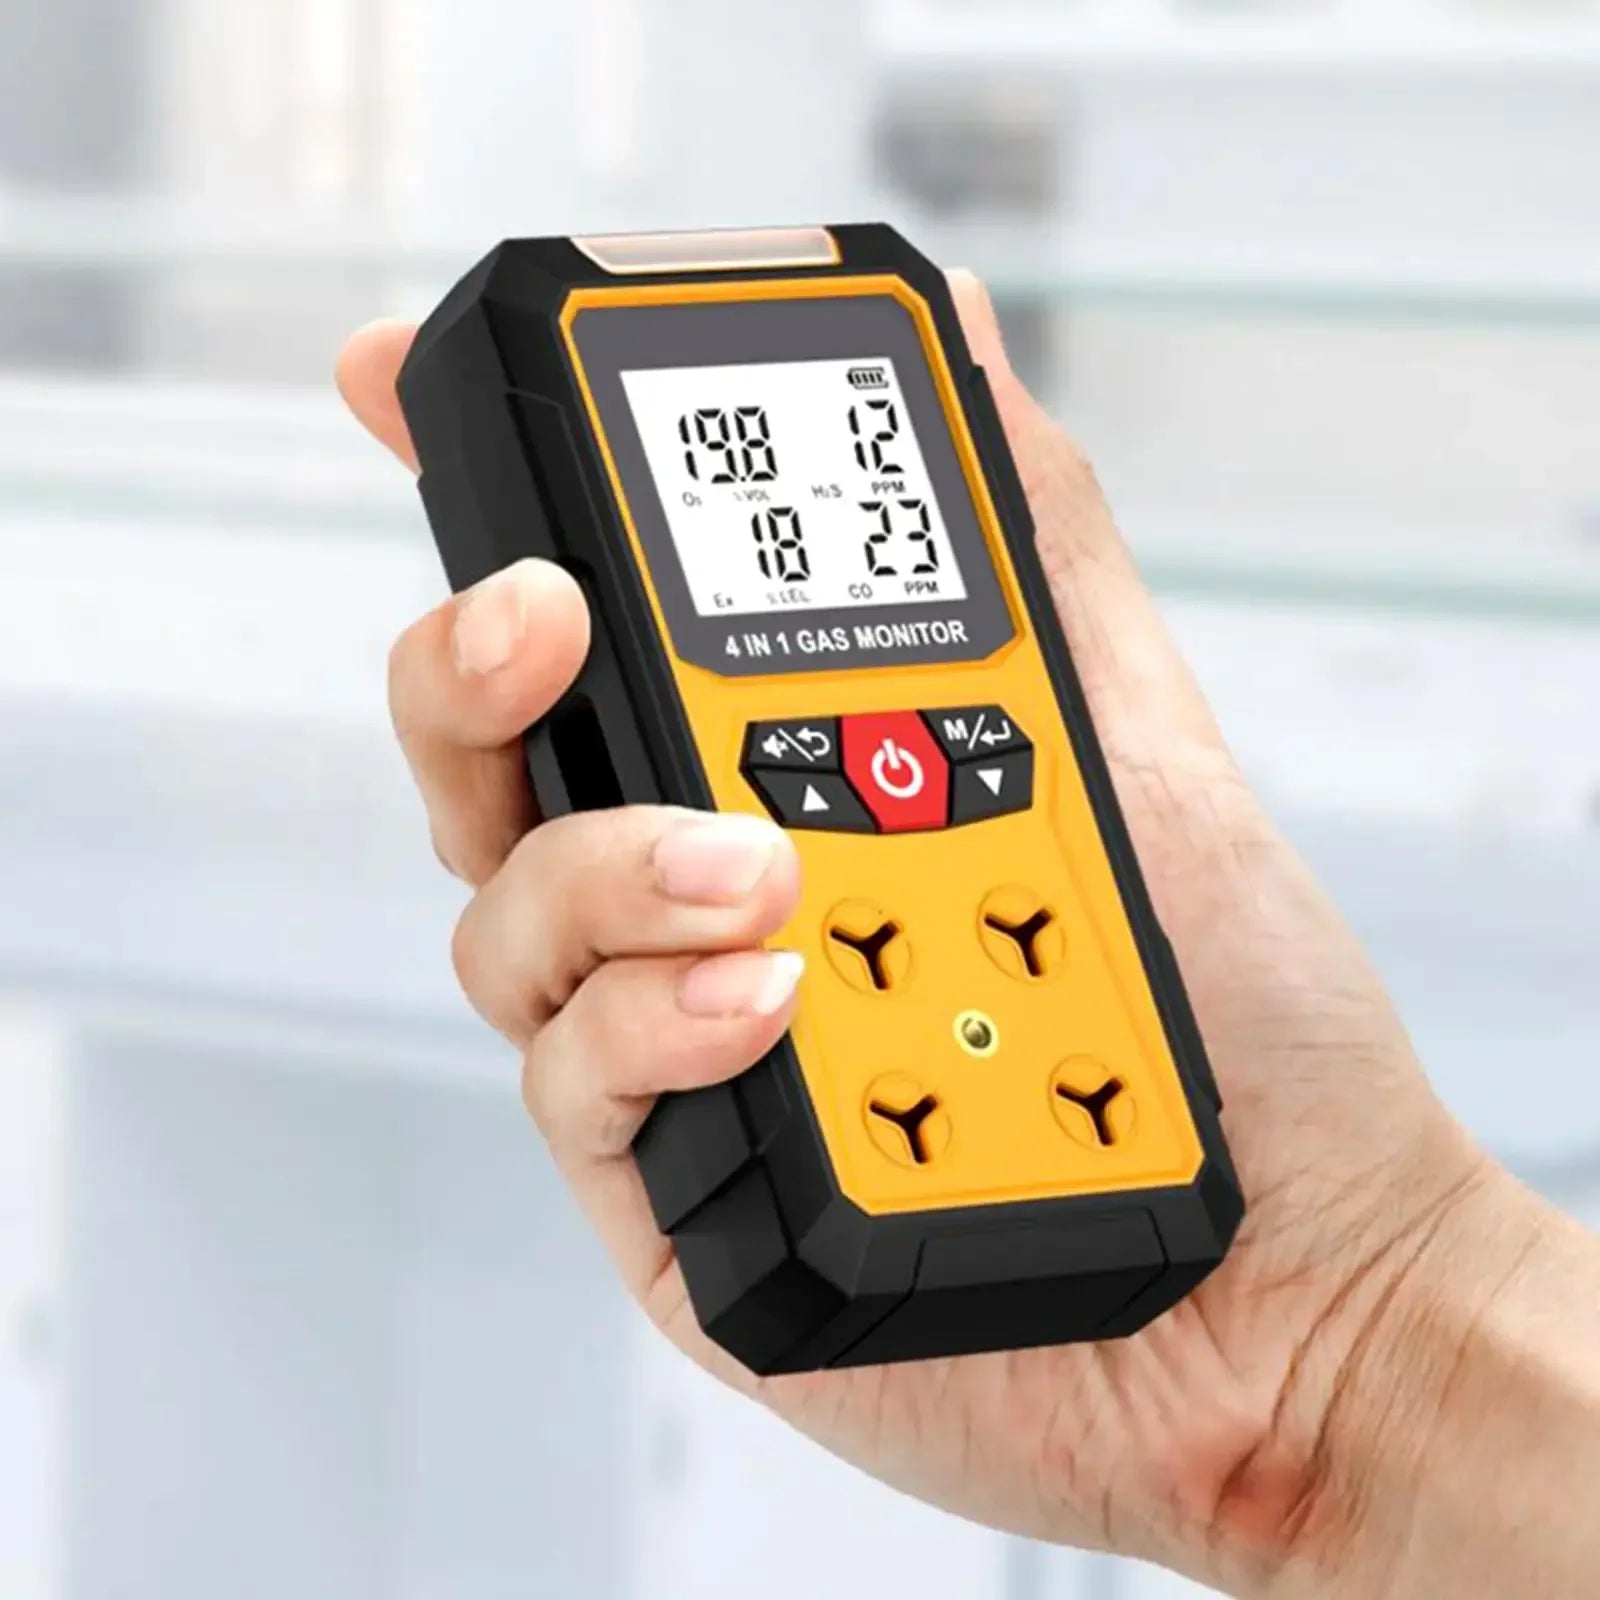 Gas Leak Detector 4-in-1 (H2S, EX, O2, CO) - Reliable Home and Workplace Safety Monitor with Precise Detection - Gas Leak Detector 4-in-1 (H2S, EX, O2, CO) Price in Pakistan